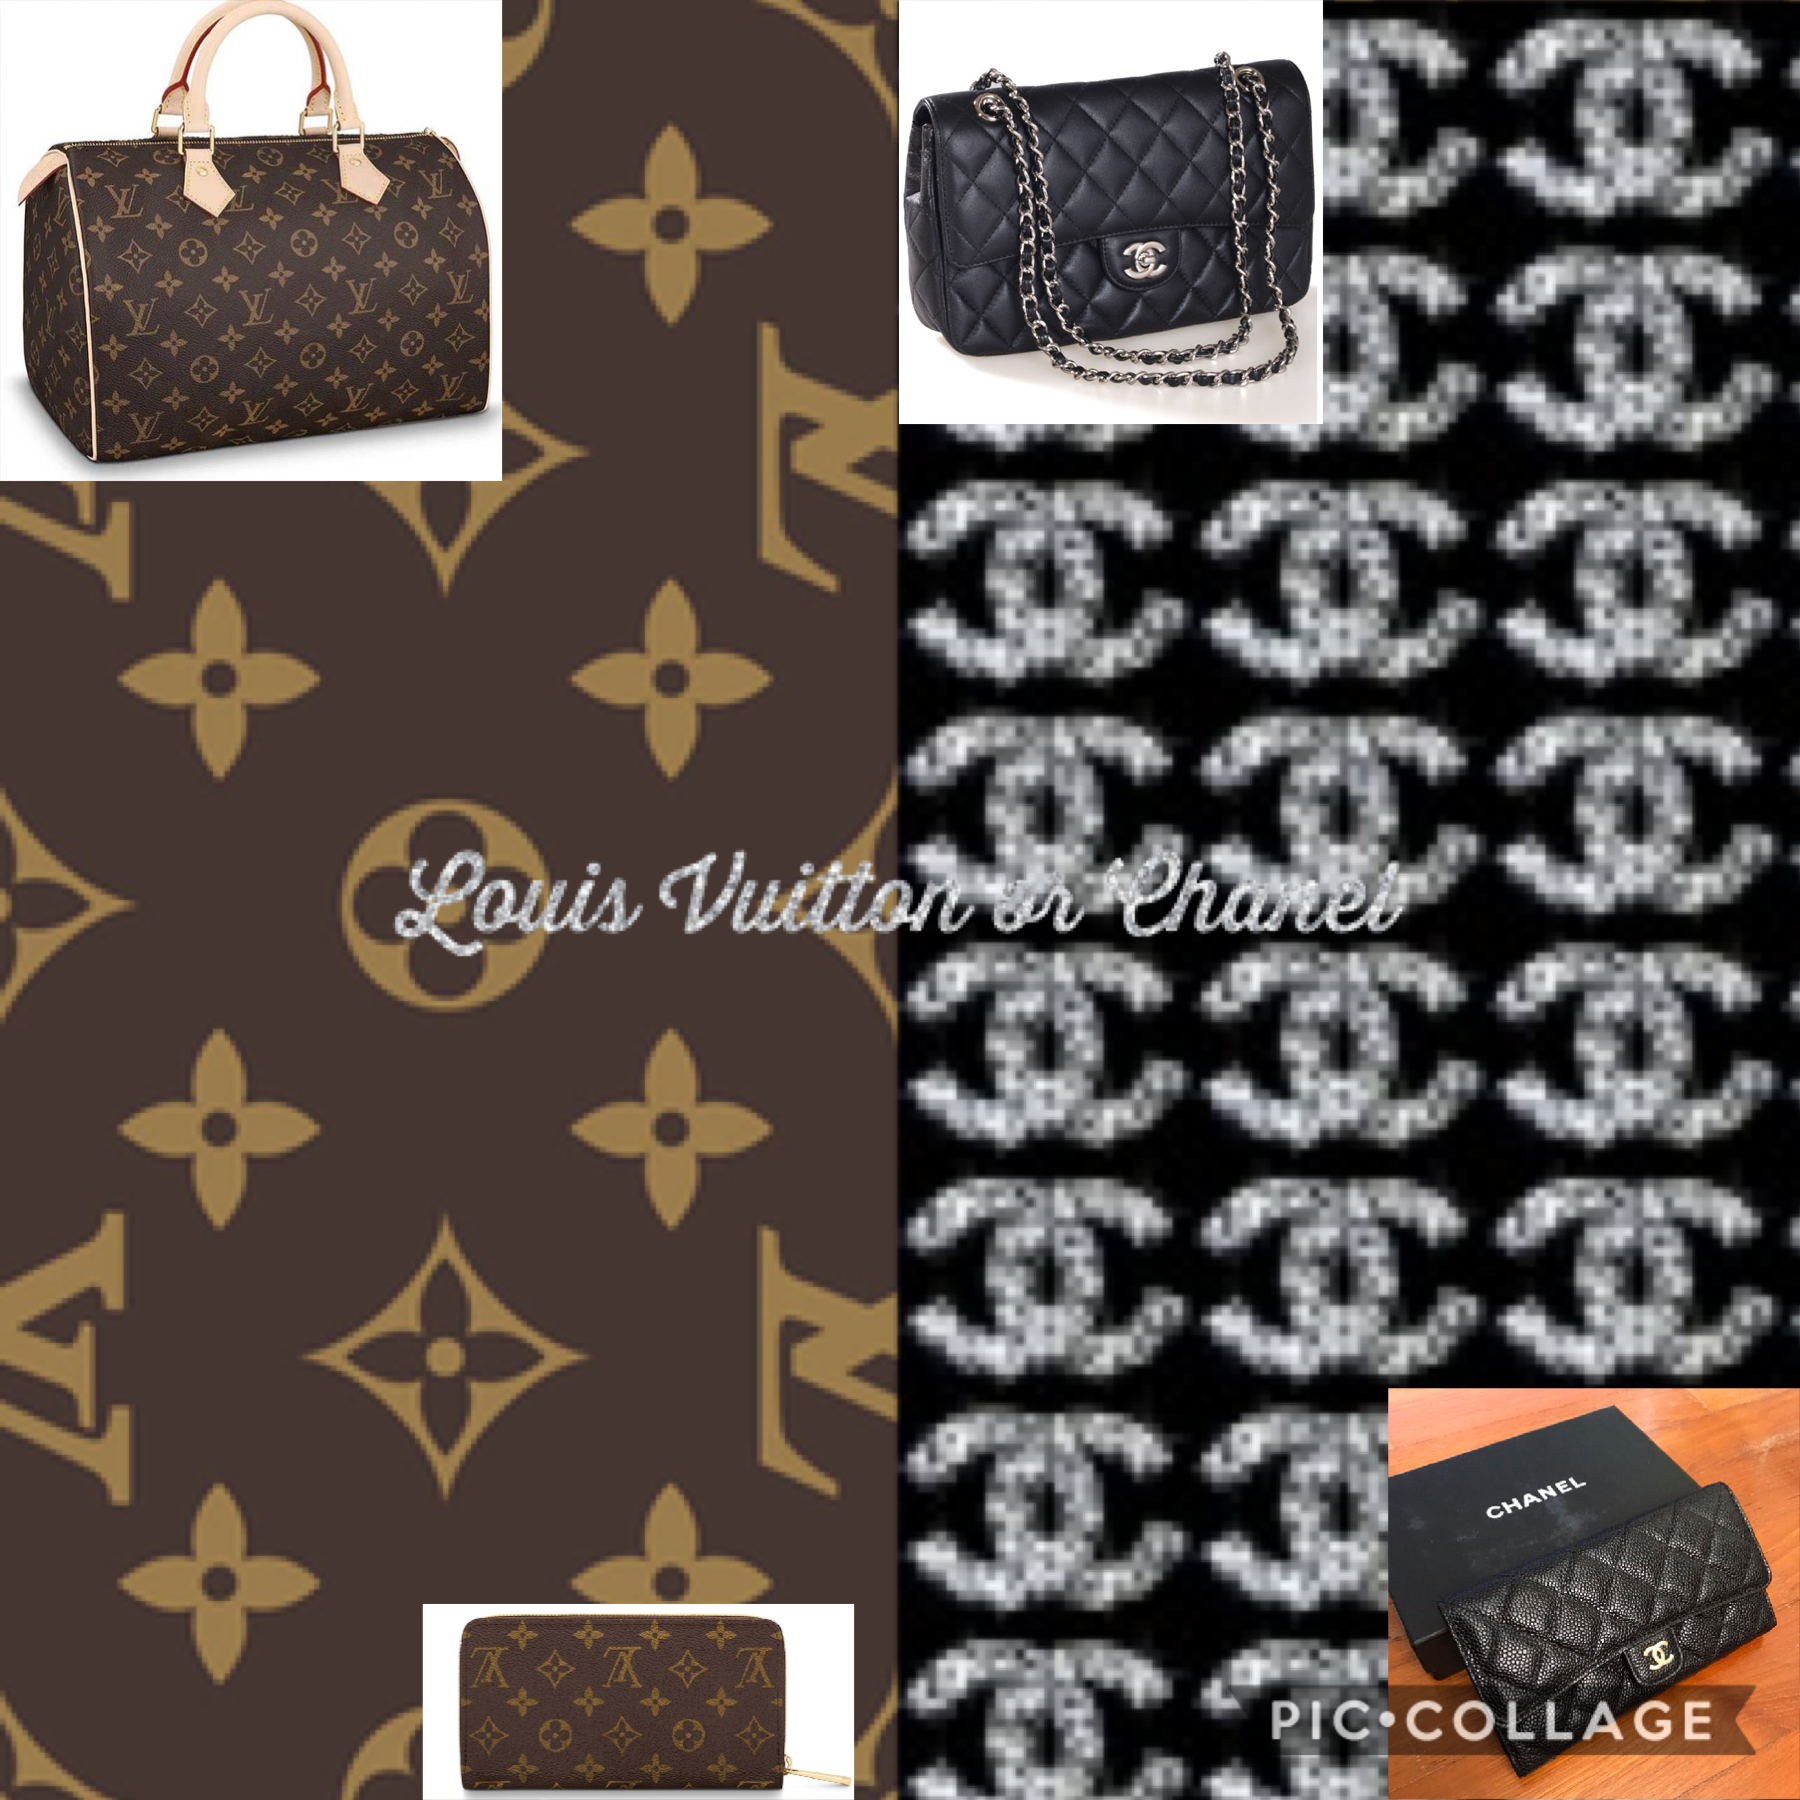 Like if you like Louis Vuitton Comment if you like Chanel